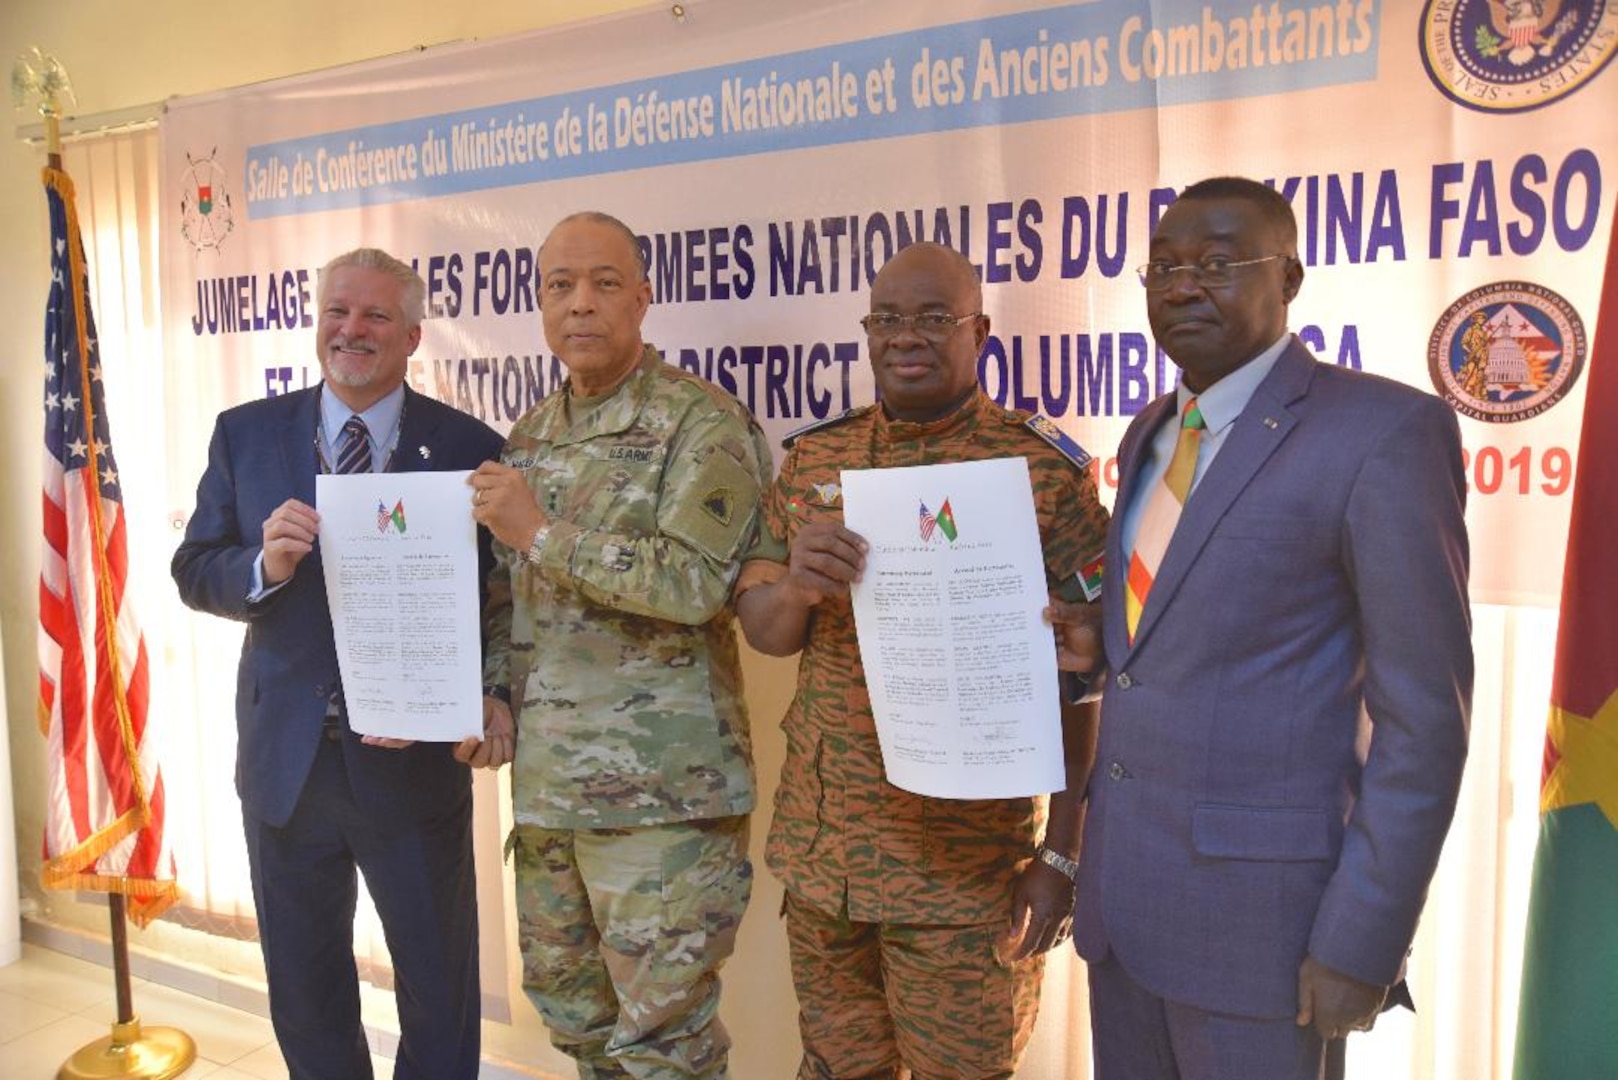 The District of Columbia National Guard and the National Armed Forces of Burkina Faso signed a partnership agreement on Friday, February 1, 2019 in Ouagadougou, Burkina Faso, formalizing D.C. and the West African nation as the newest partners in the Department of Defense’s State Partnership Program.